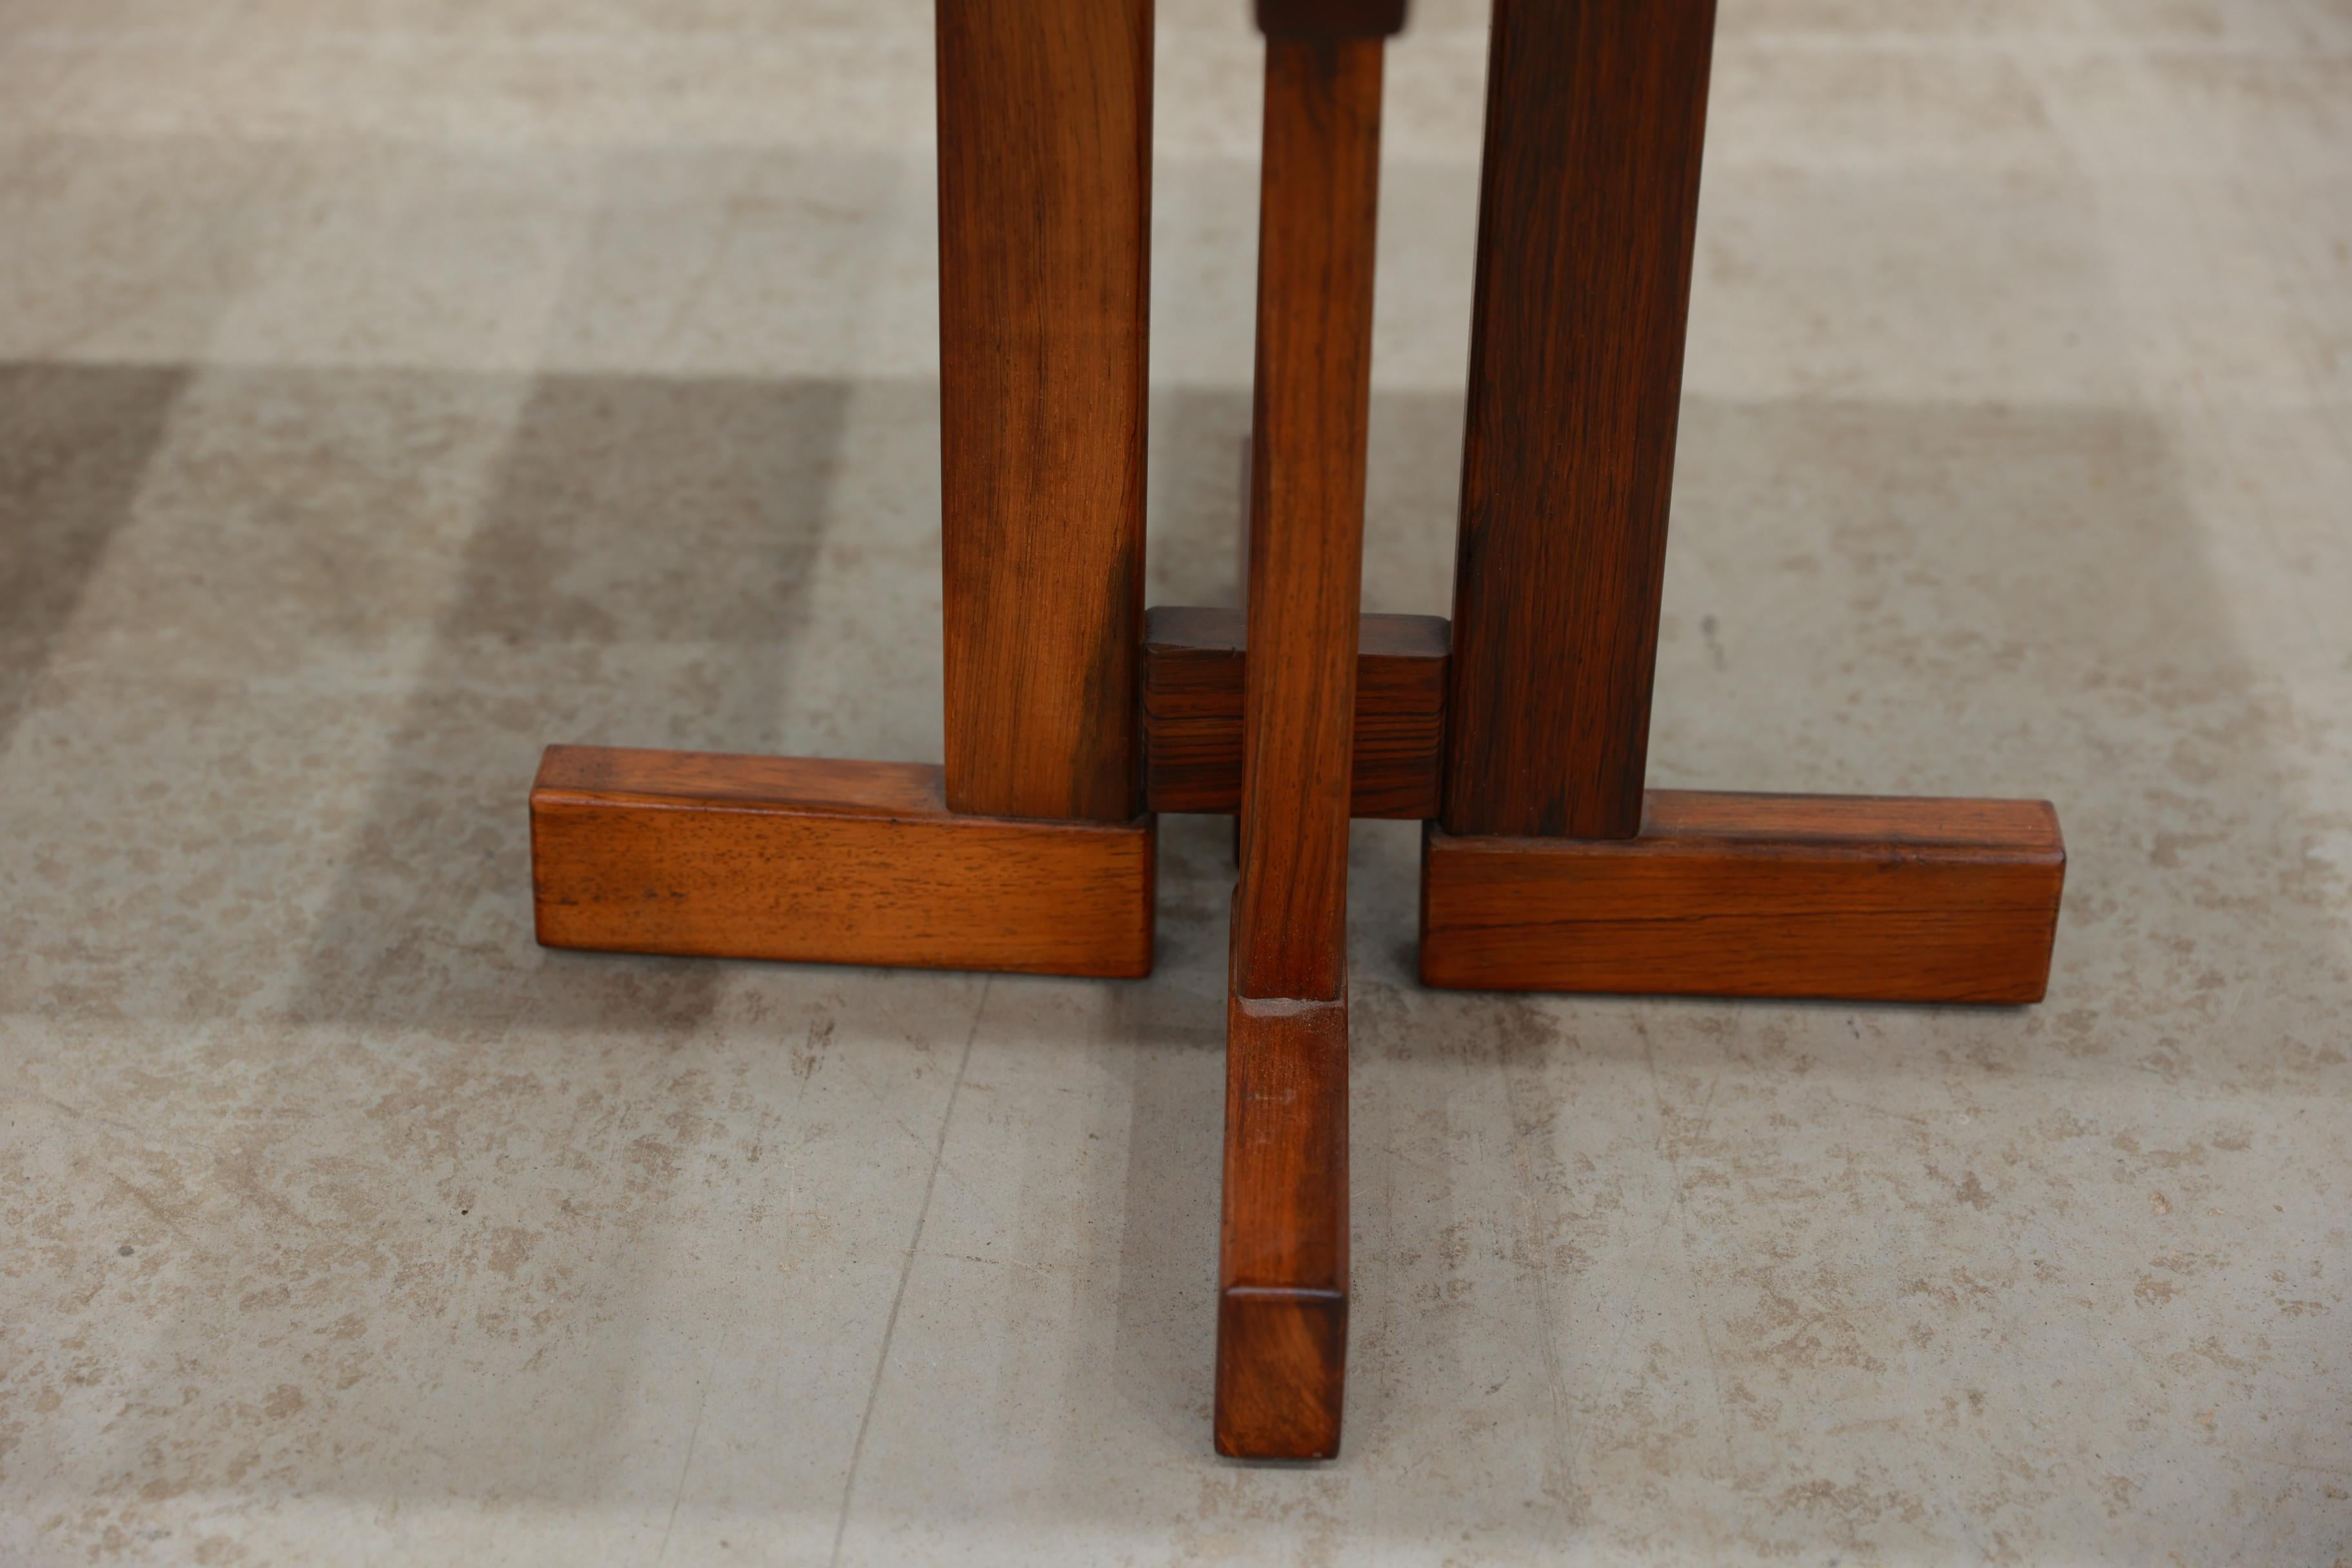 Mid-Century Modern Brazilian Modern Pair of Side Tables in Rosewood and Granite by Celina, c. 1960 For Sale